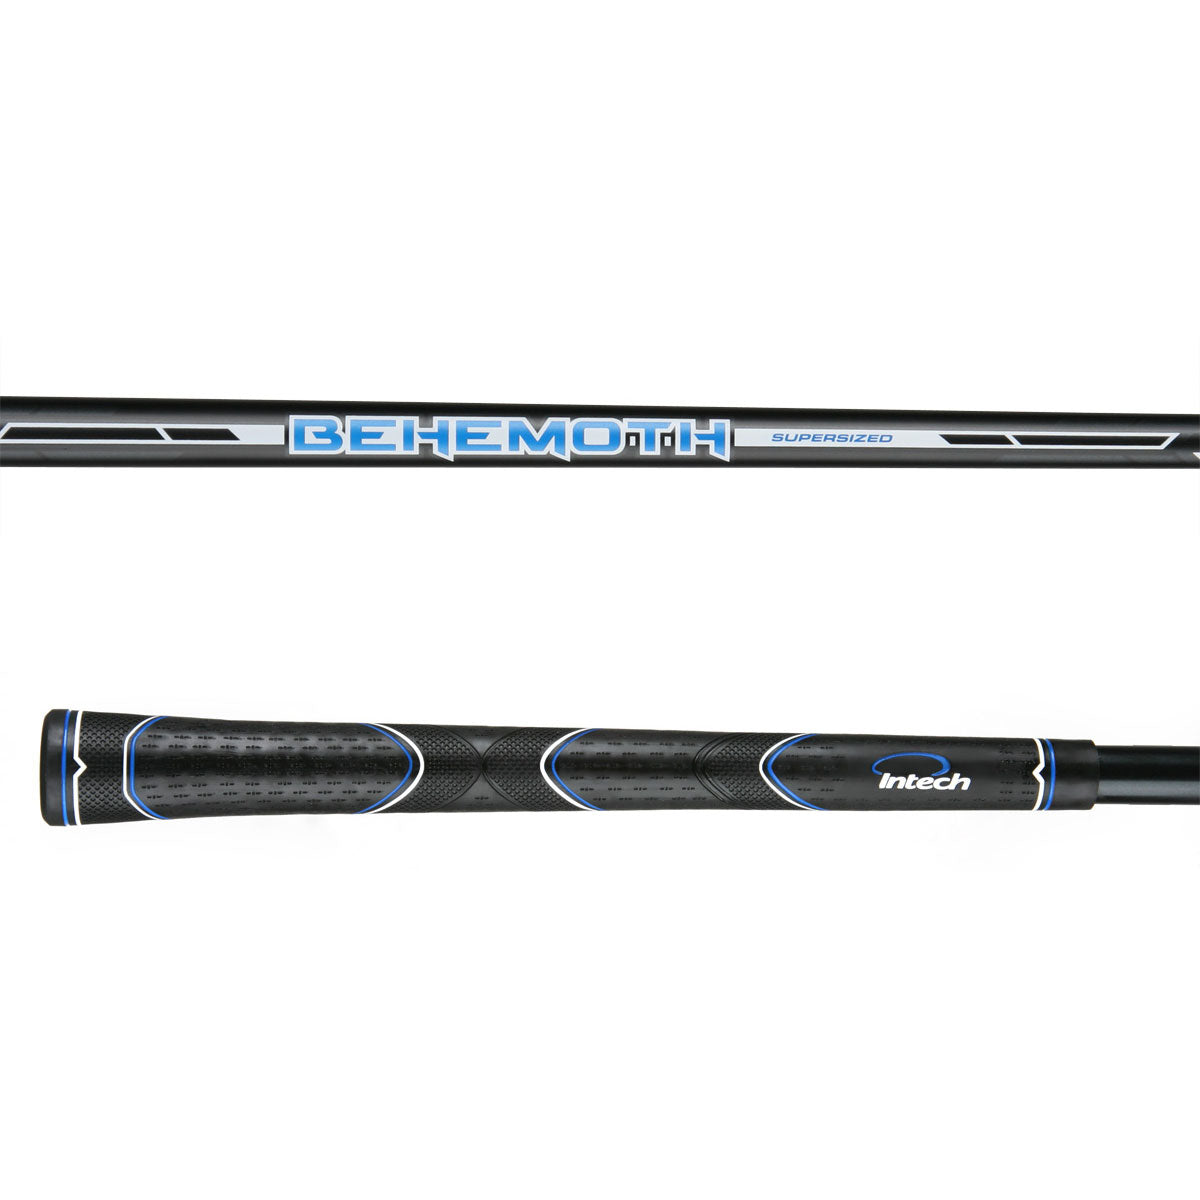 stock shaft and grip for the Intech Behemoth Oversized Fairway Wood